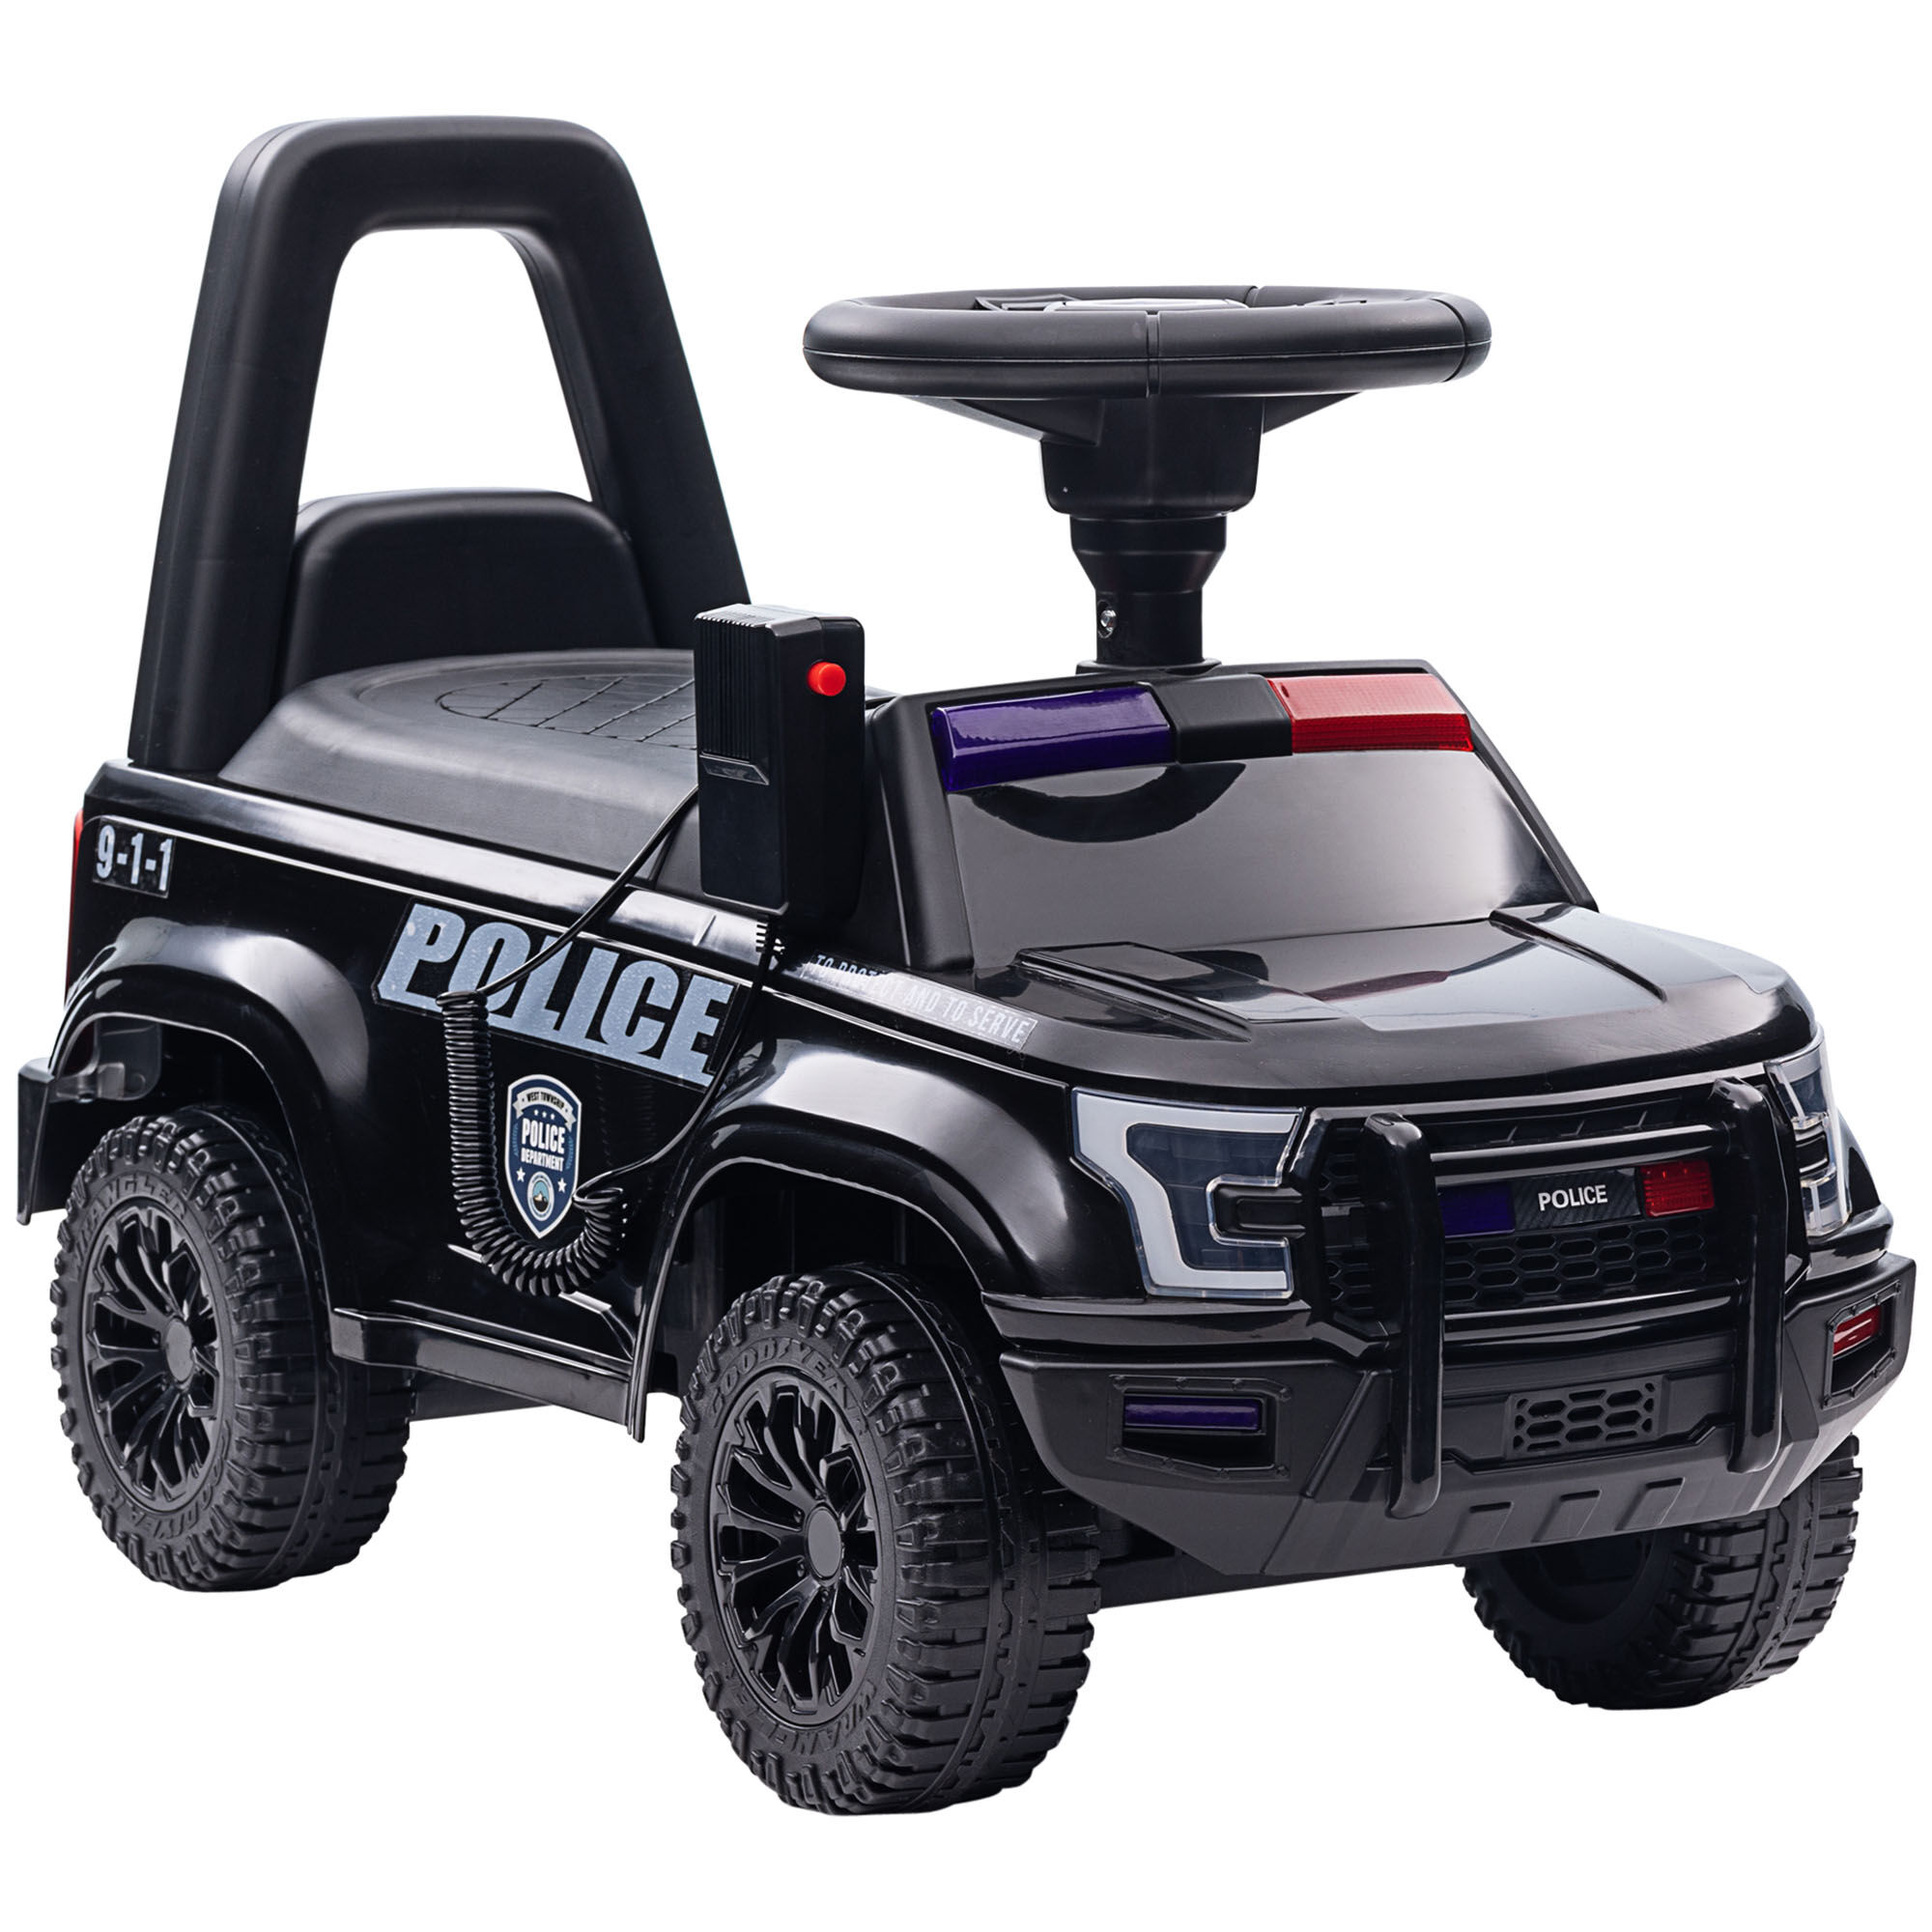 Aosom Police Car Ride-on with Megaphone, Kids Ride On Sliding Car with Hidden Under Seat Storage for 18 Months to 5 Years, Removable Backrest, Black